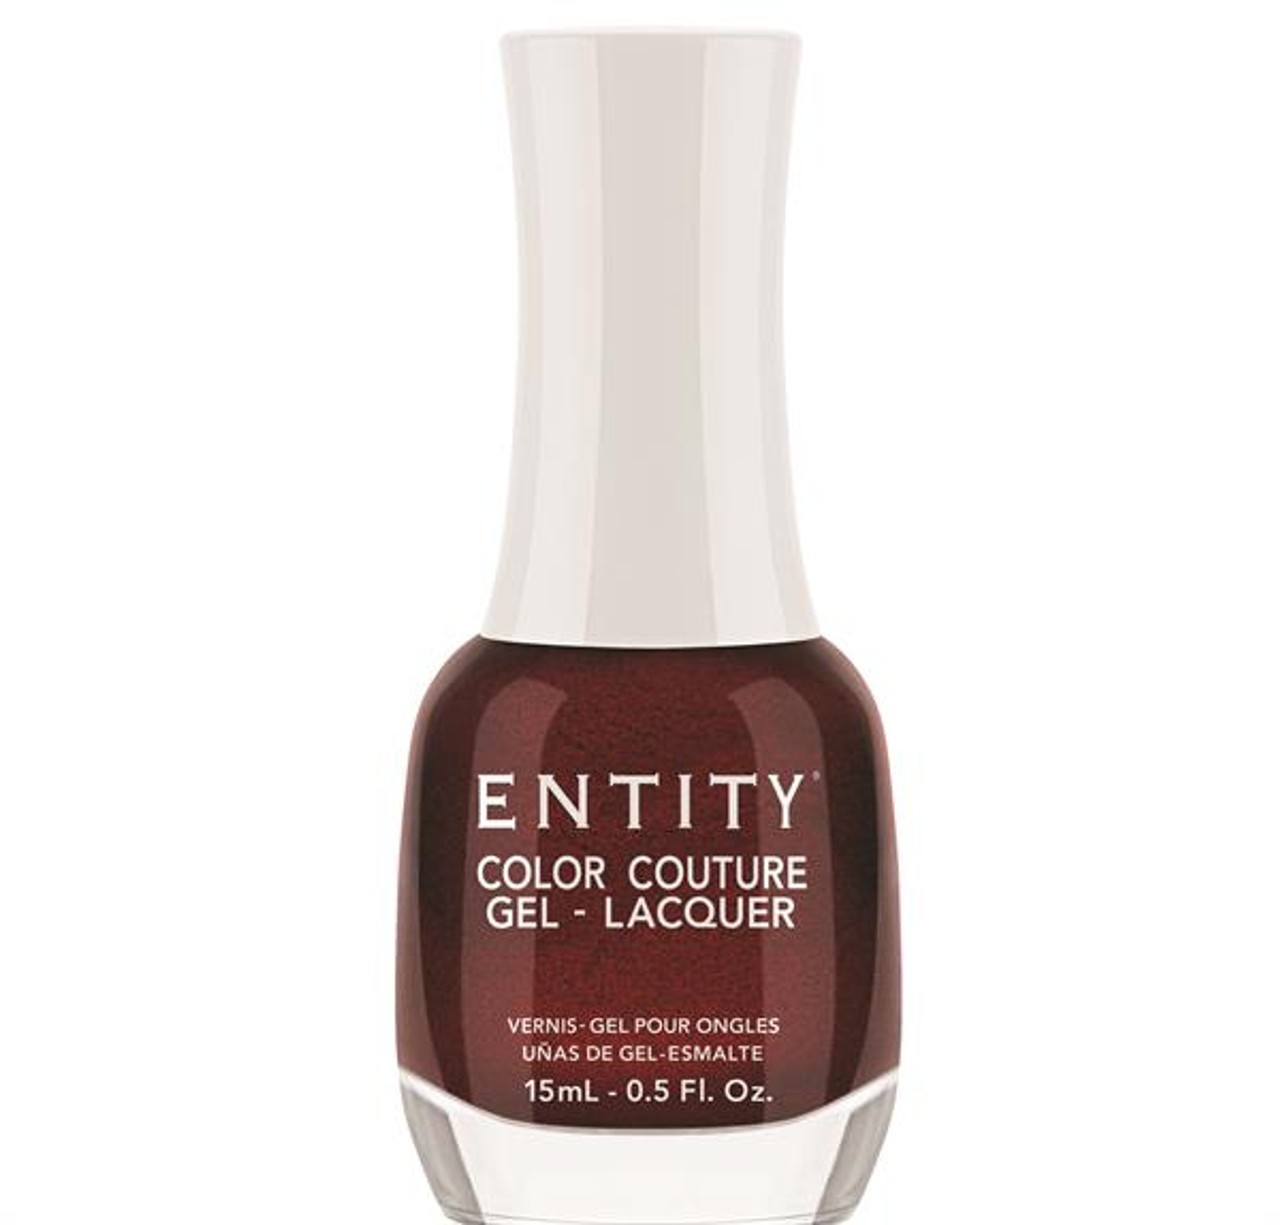 Entity Color Couture Gel-Lacquer PIN UP GIRL - 15 mL / .5 fl oz